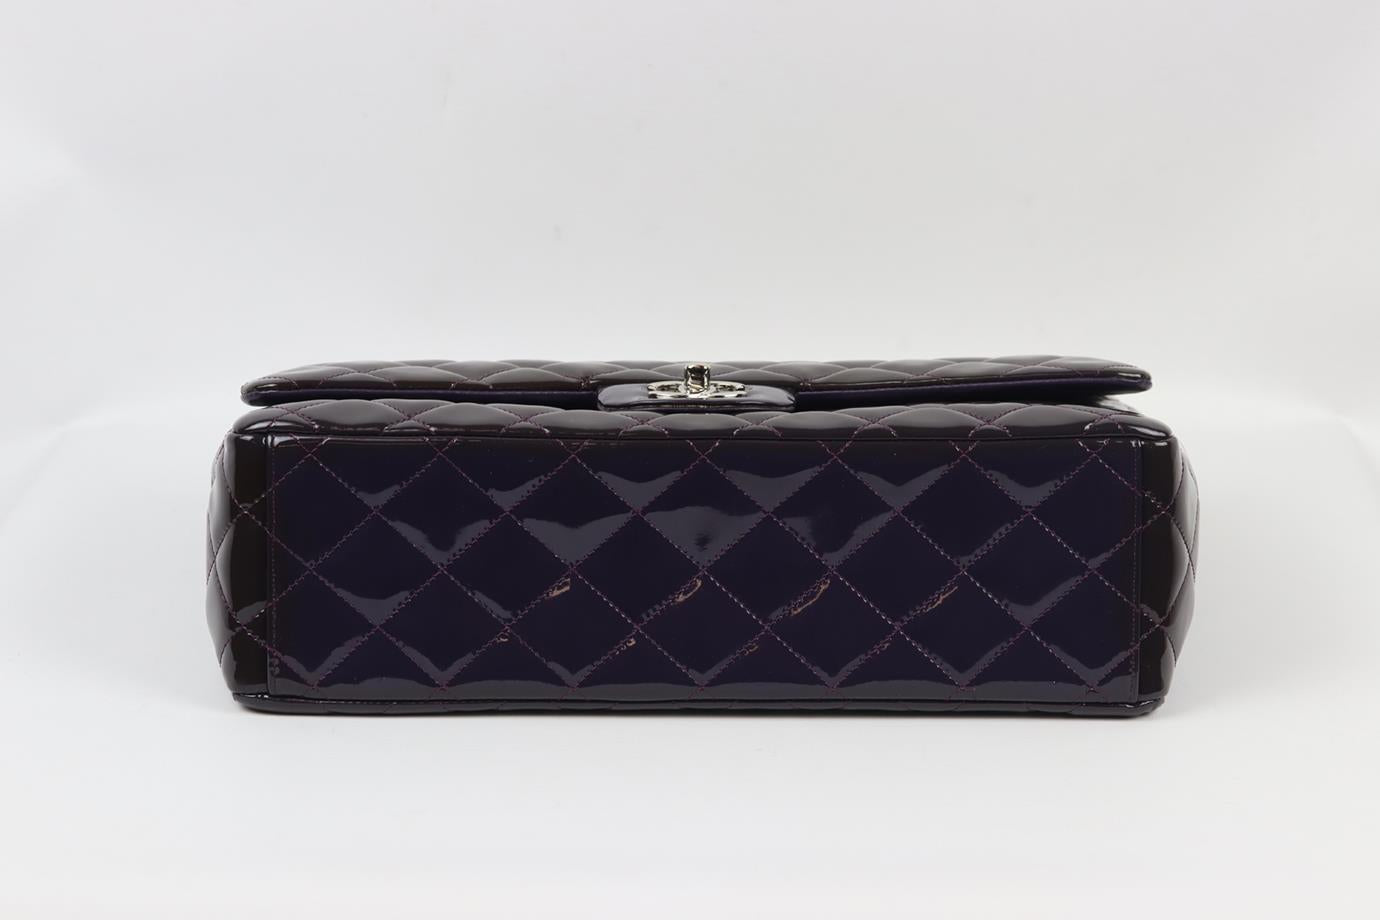 CHANEL 2010 MAXI CLASSIC QUILTED PATENT LEATHER SINGLE FLAP SHOULDER BAG